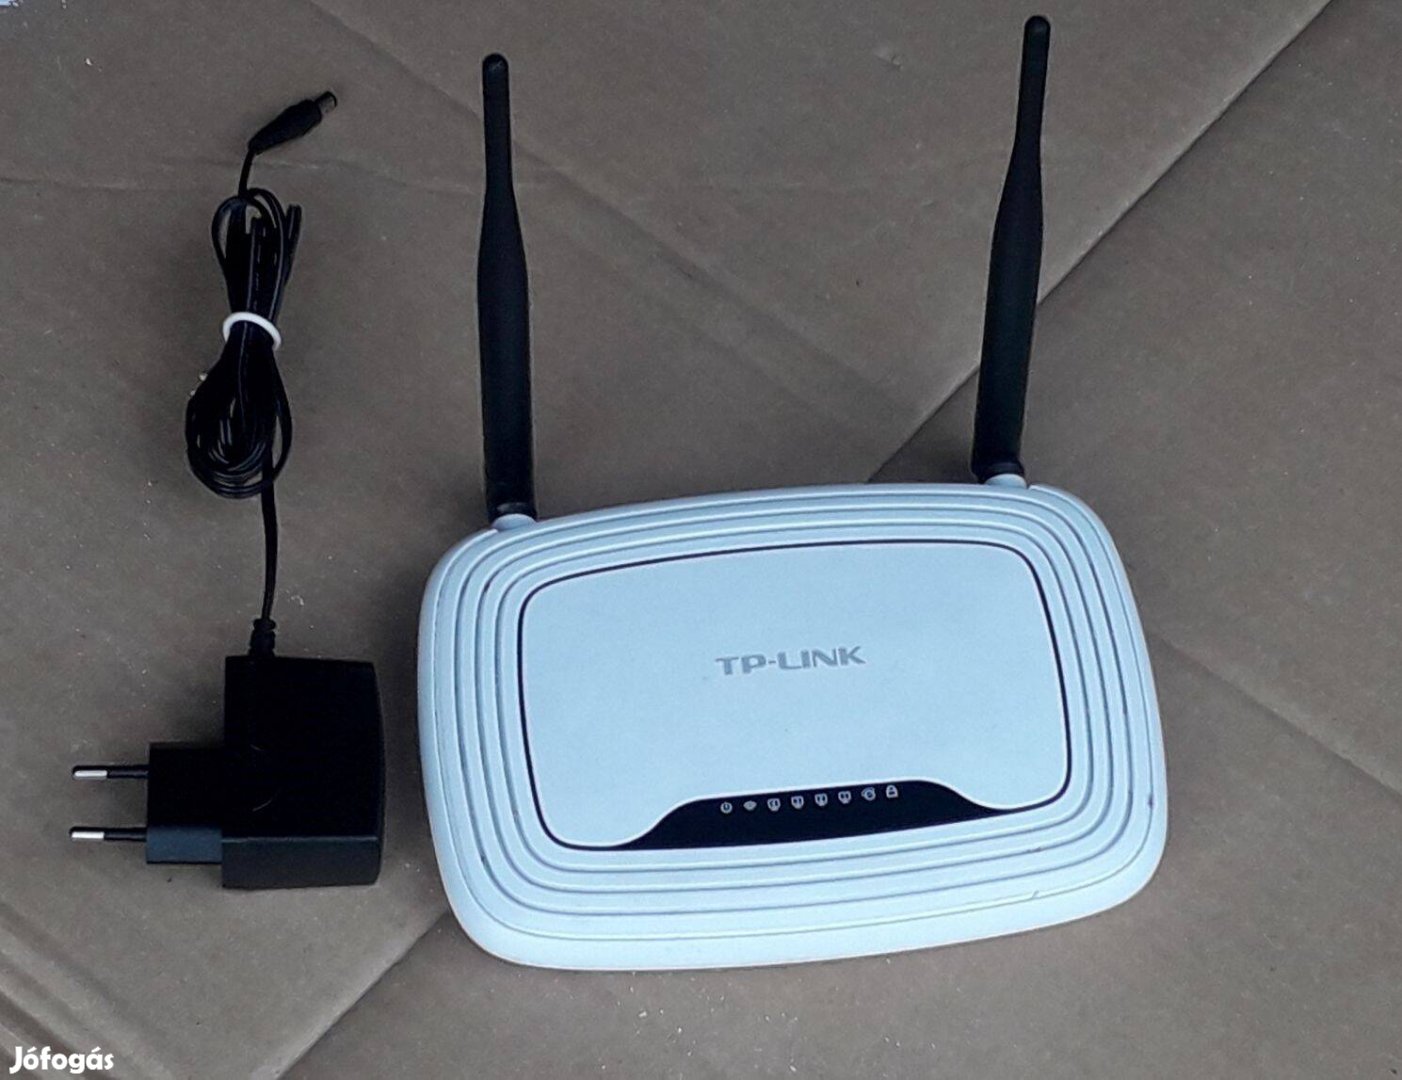 TP-Link TL-WR841N wifi router, 300 Mb/s